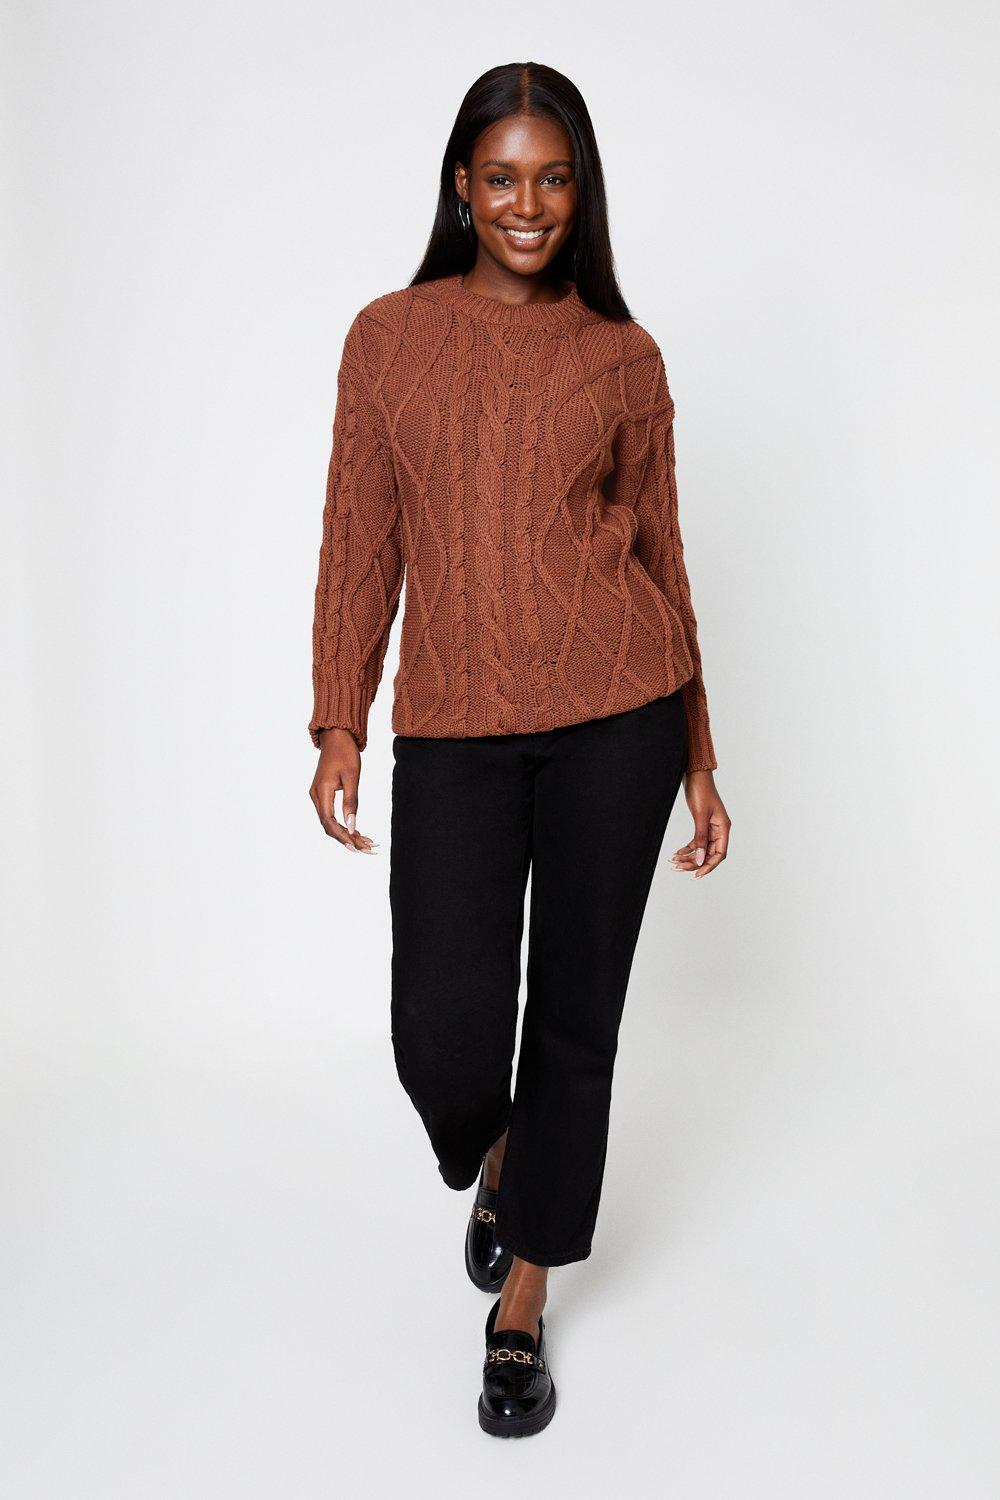 Women's Wide Sleeve Cable Long Line Jumper - caramel - M